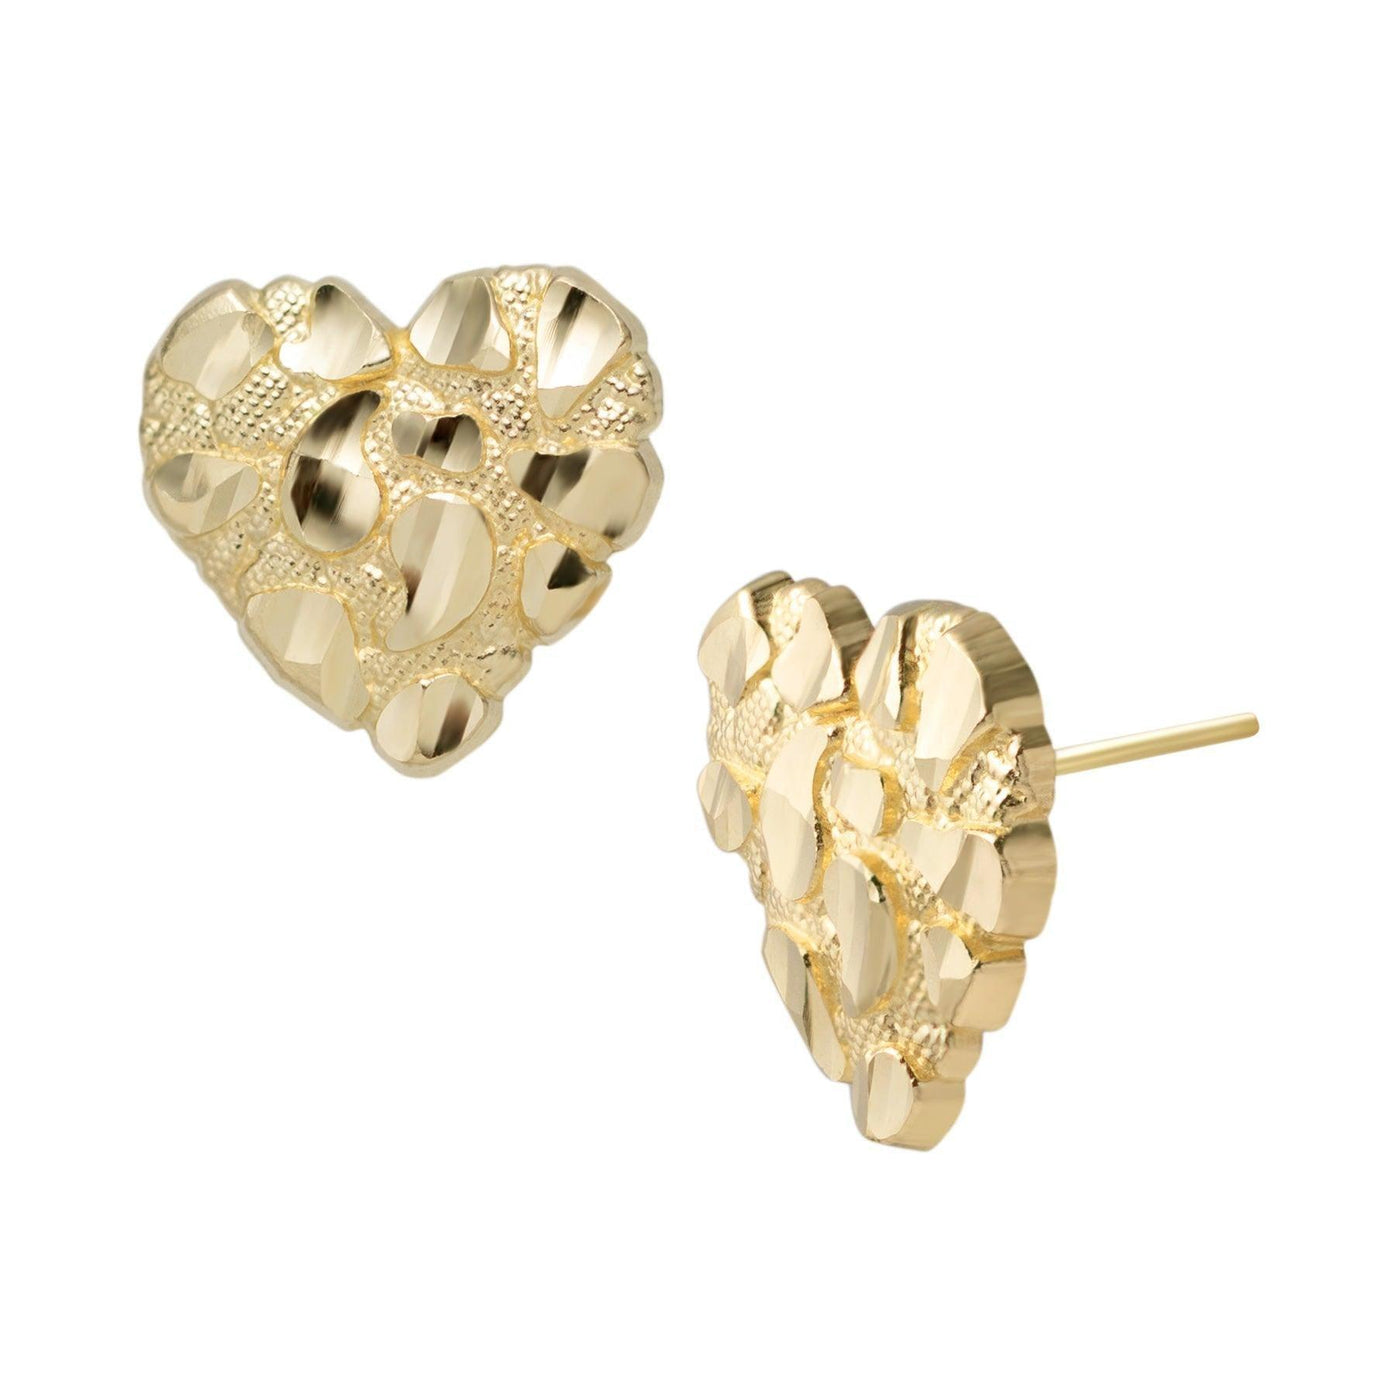 Small Heart Shaped Nugget Textured Stud Earrings Solid 10K Yellow Gold - bayamjewelry